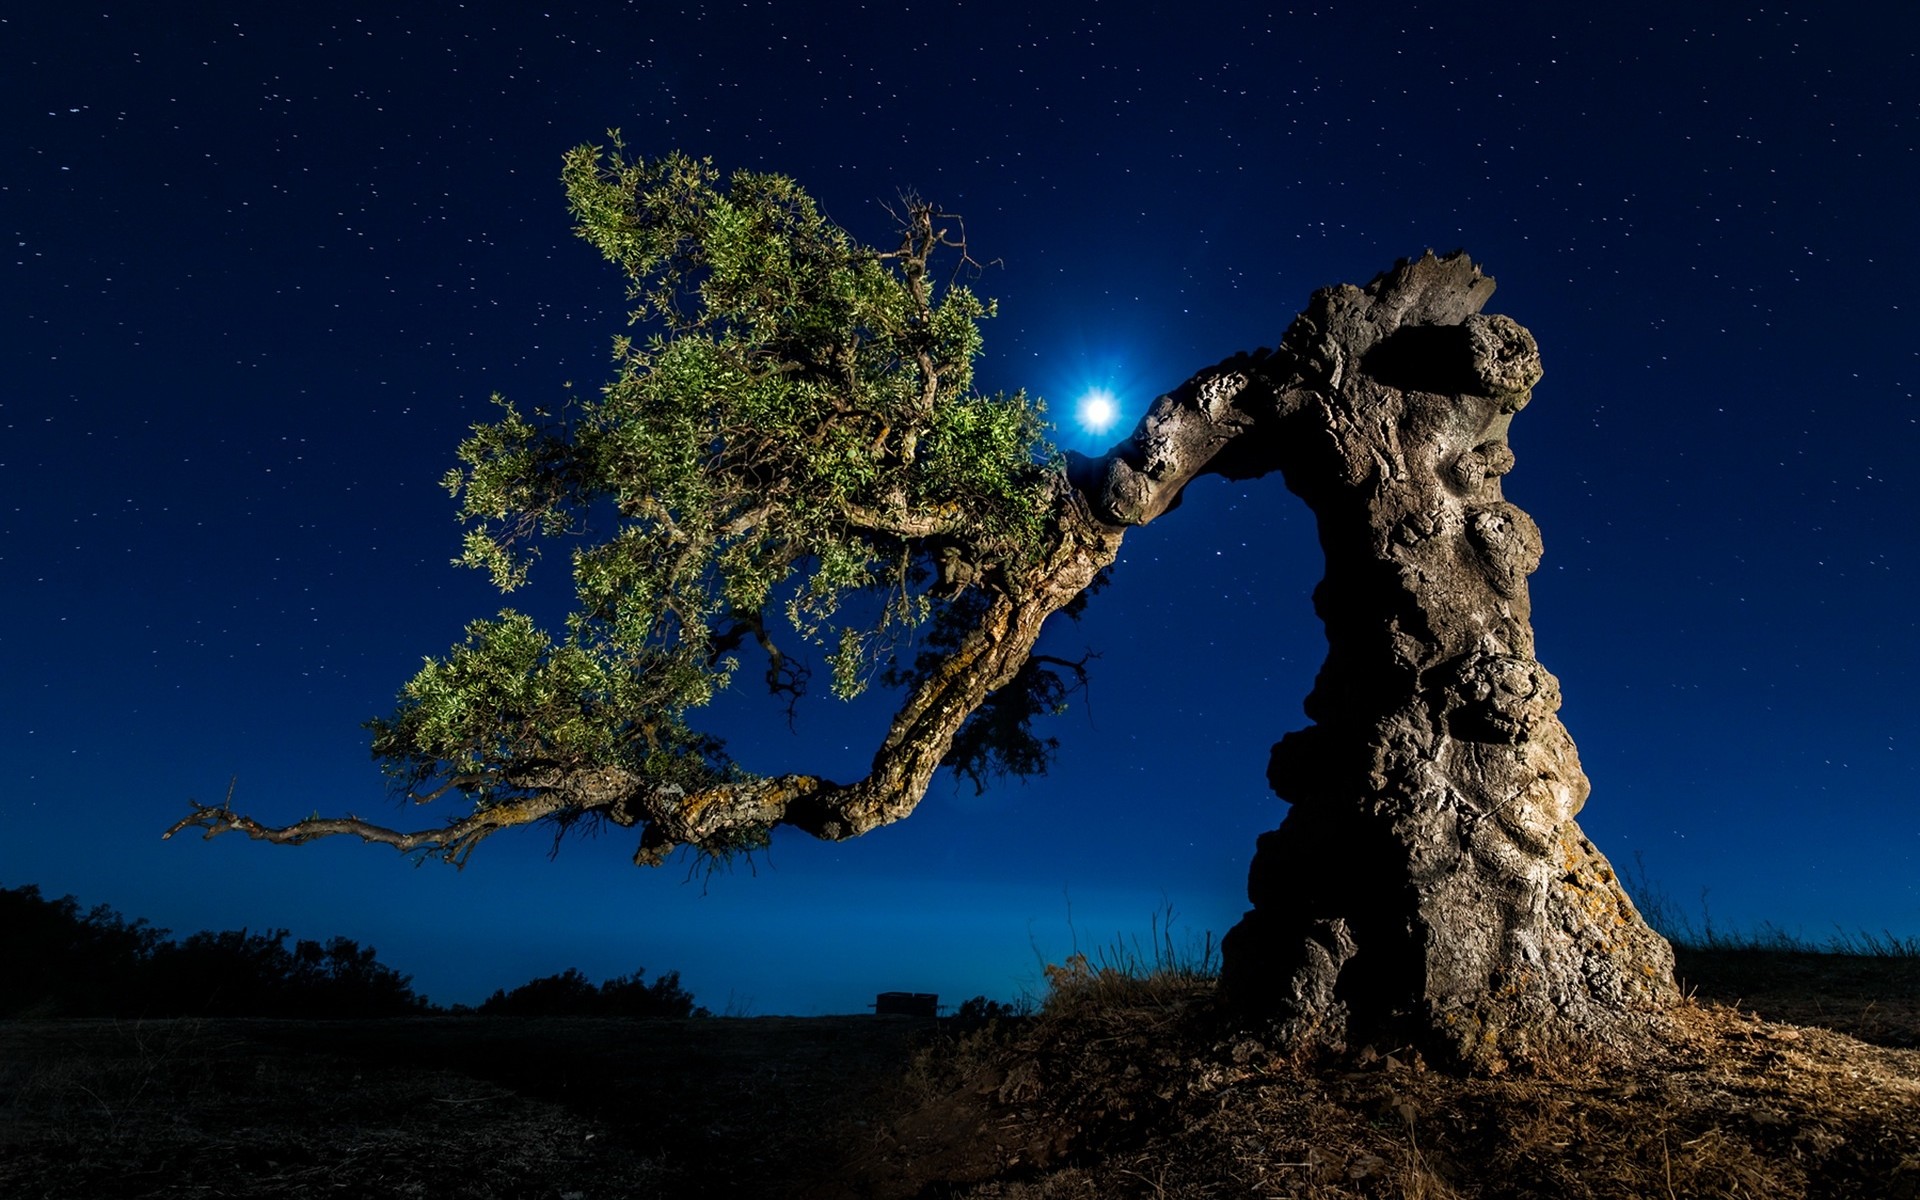 Twisted Tree Starry Night wallpapers and stock photos